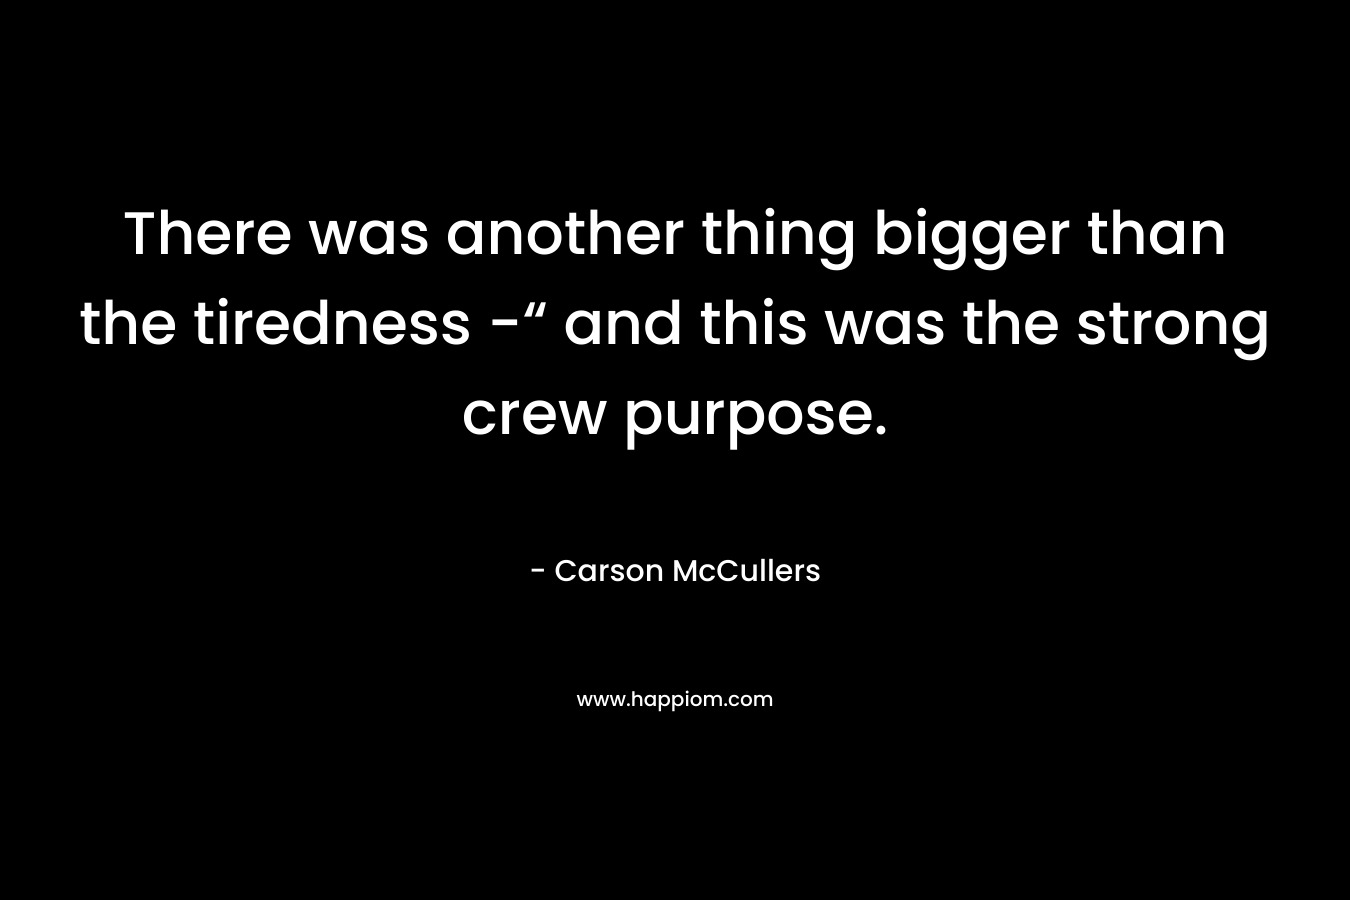 There was another thing bigger than the tiredness -“ and this was the strong crew purpose. – Carson McCullers